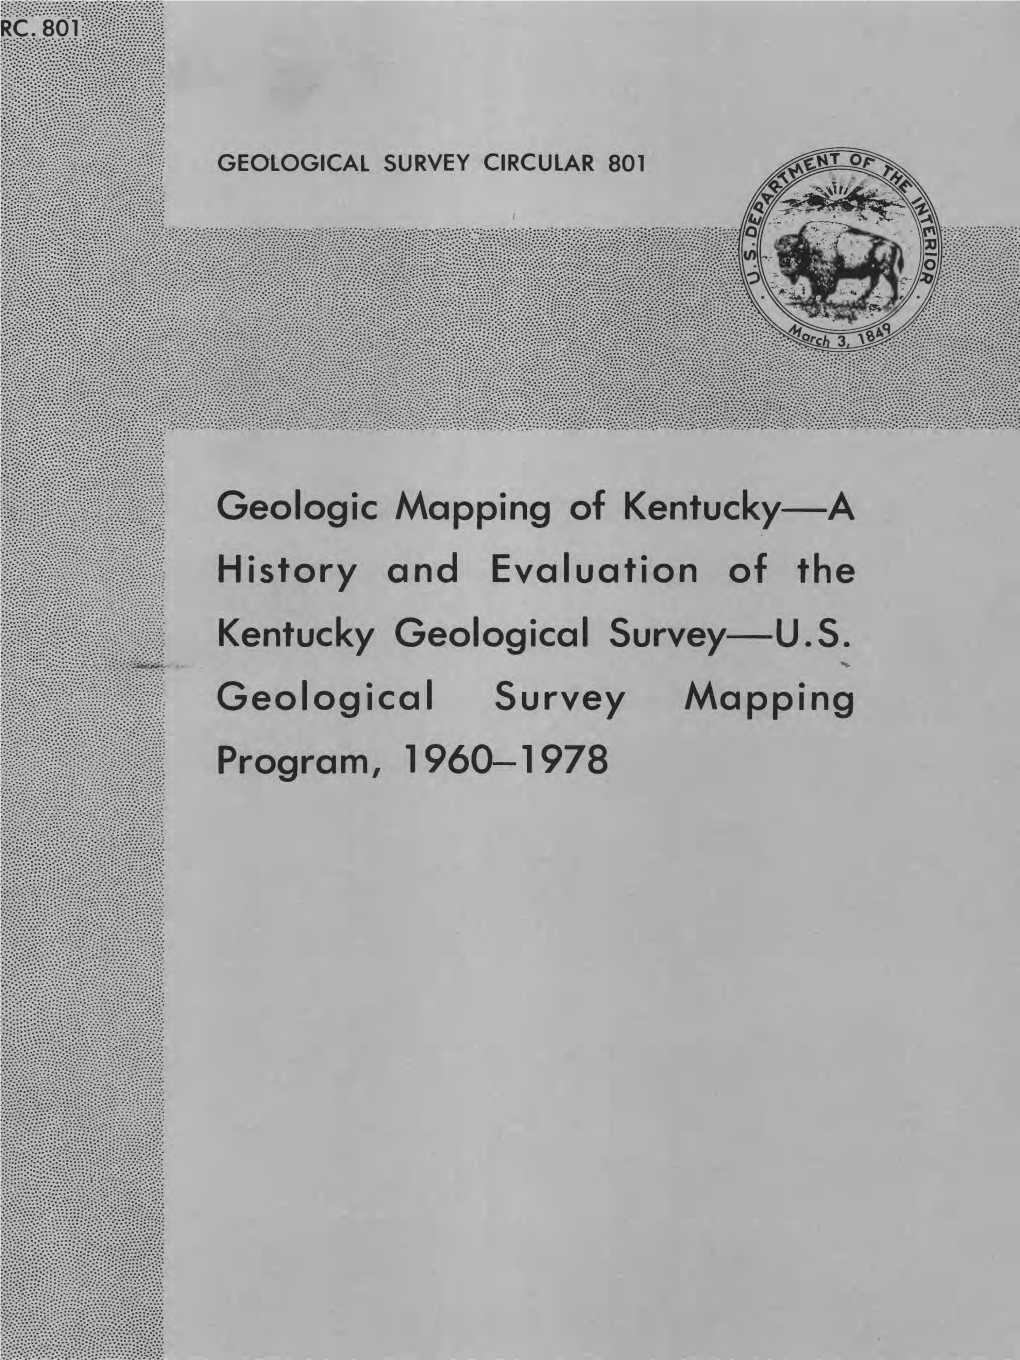 A History and Evaluation of the Kentucky Geological Survey U.S